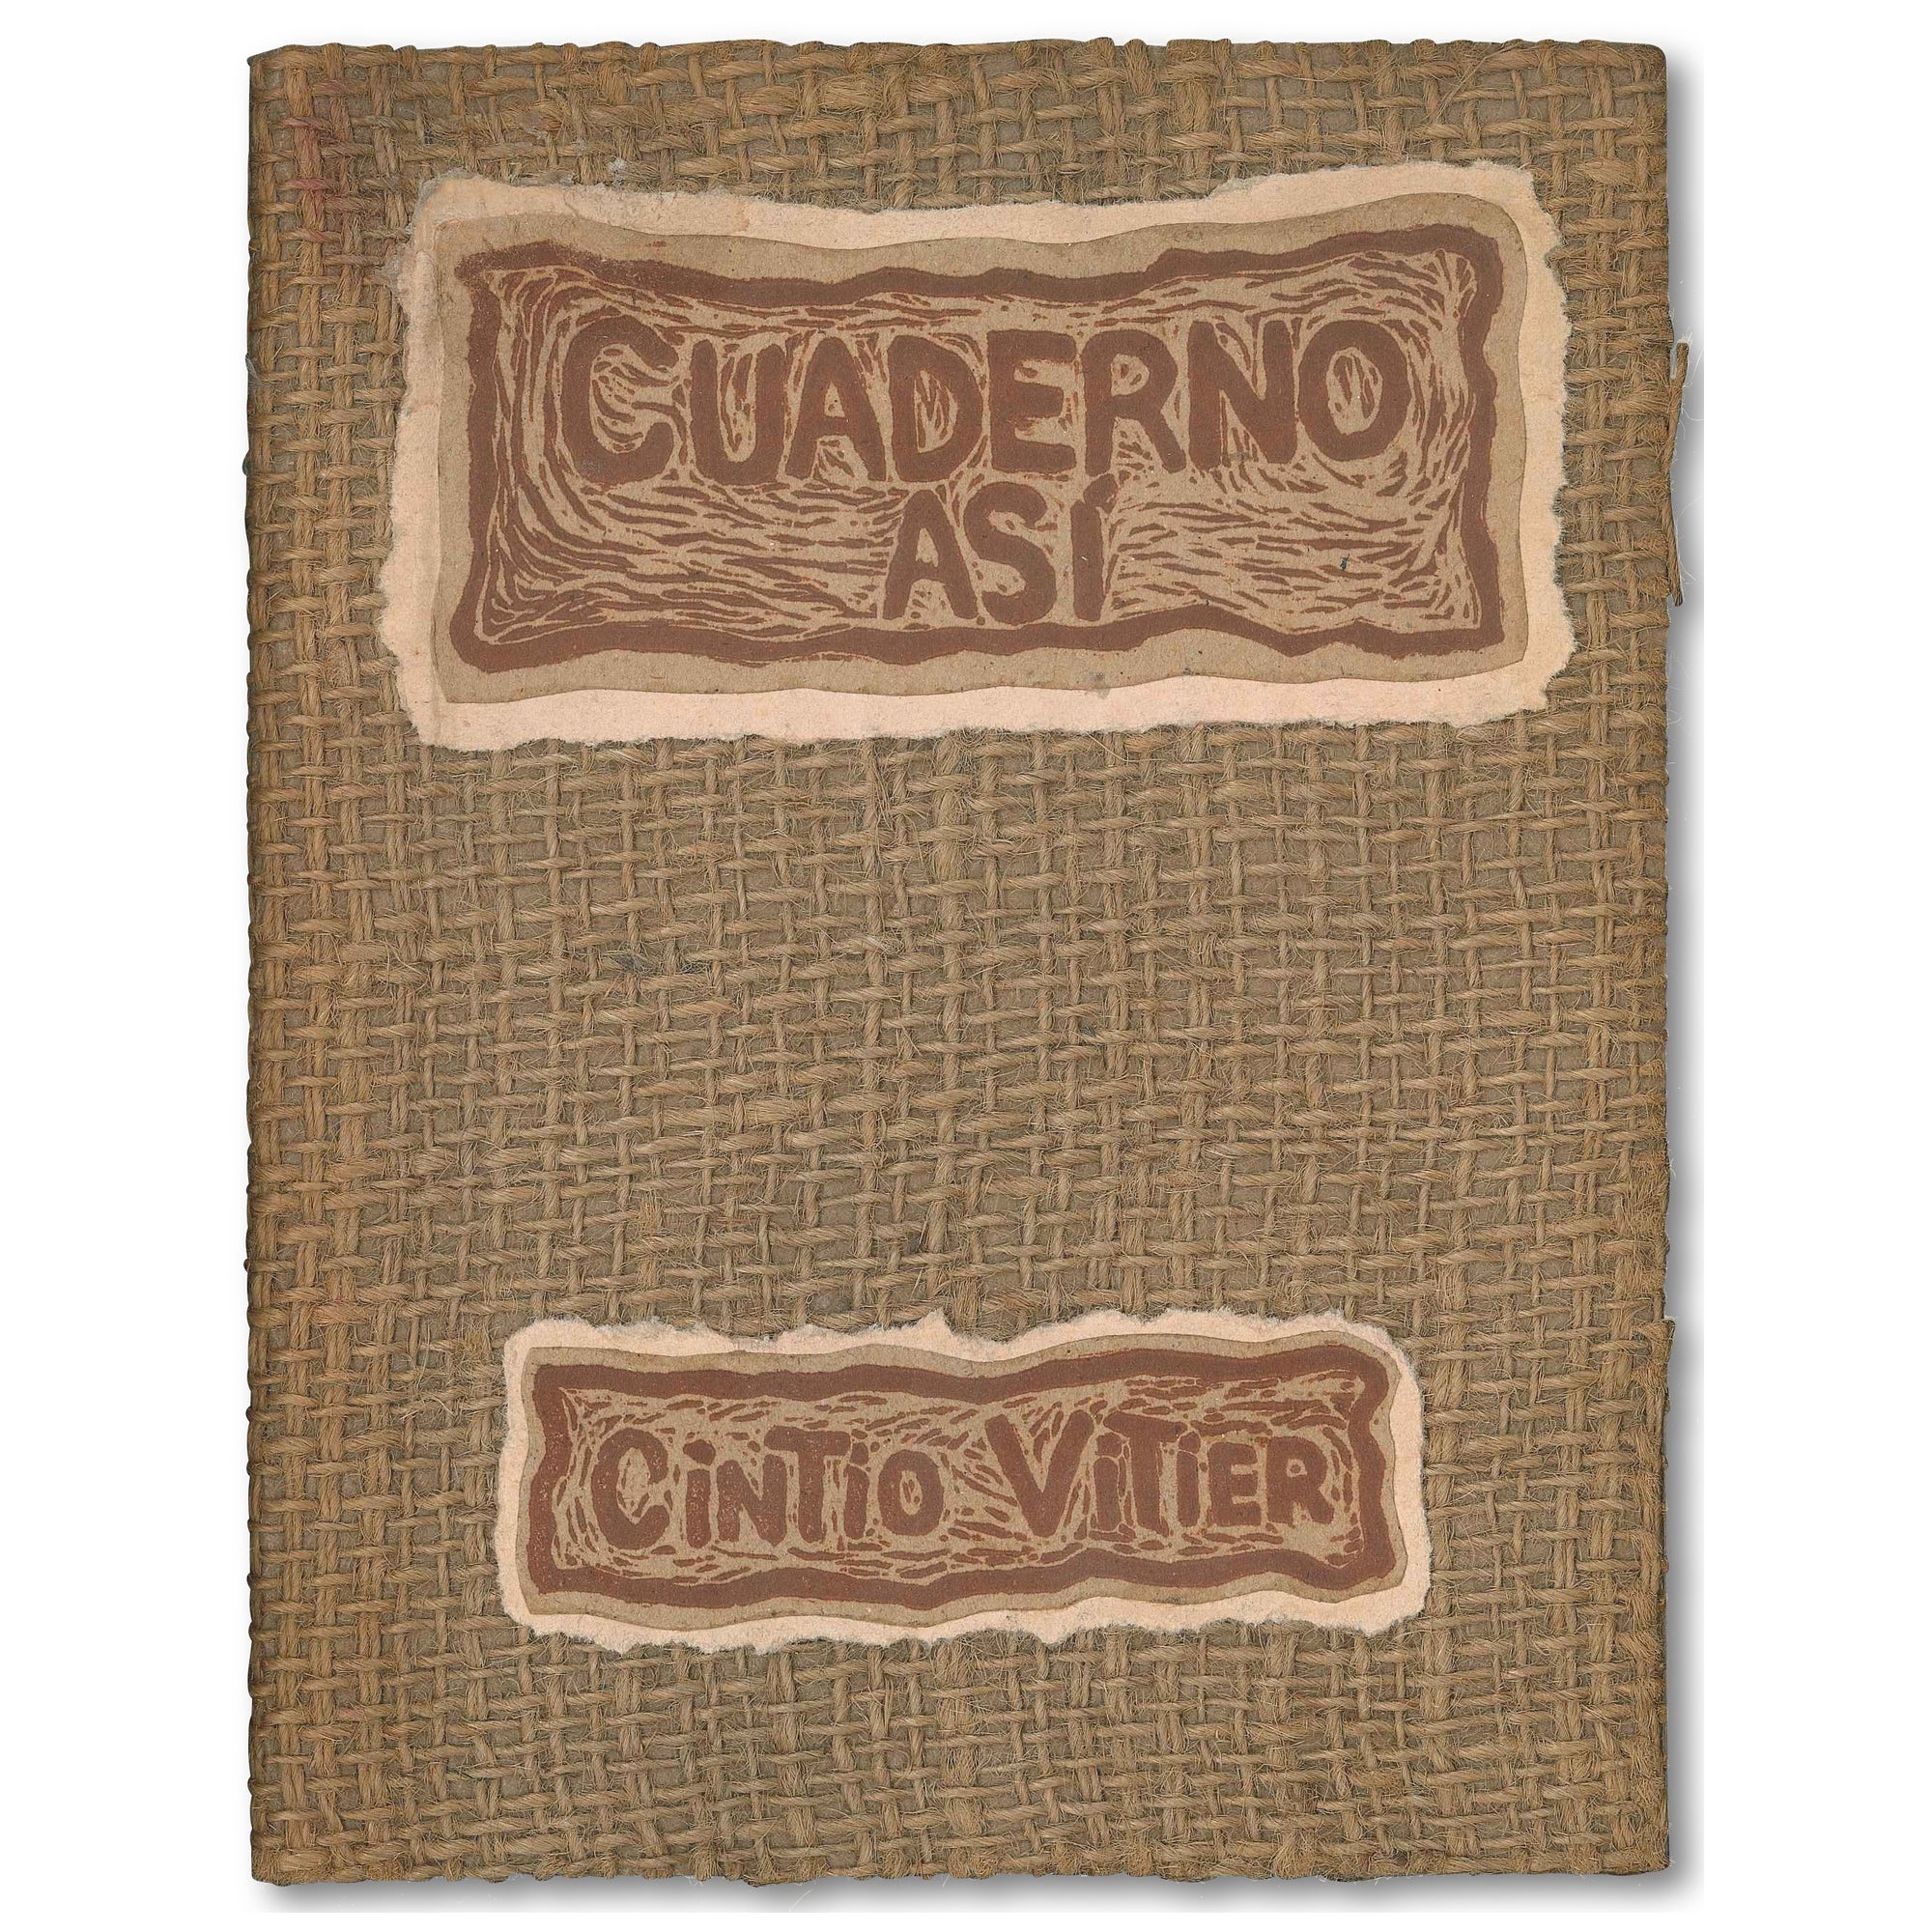 Results for: Catalog 15: Cuban Artist's Books Page 12